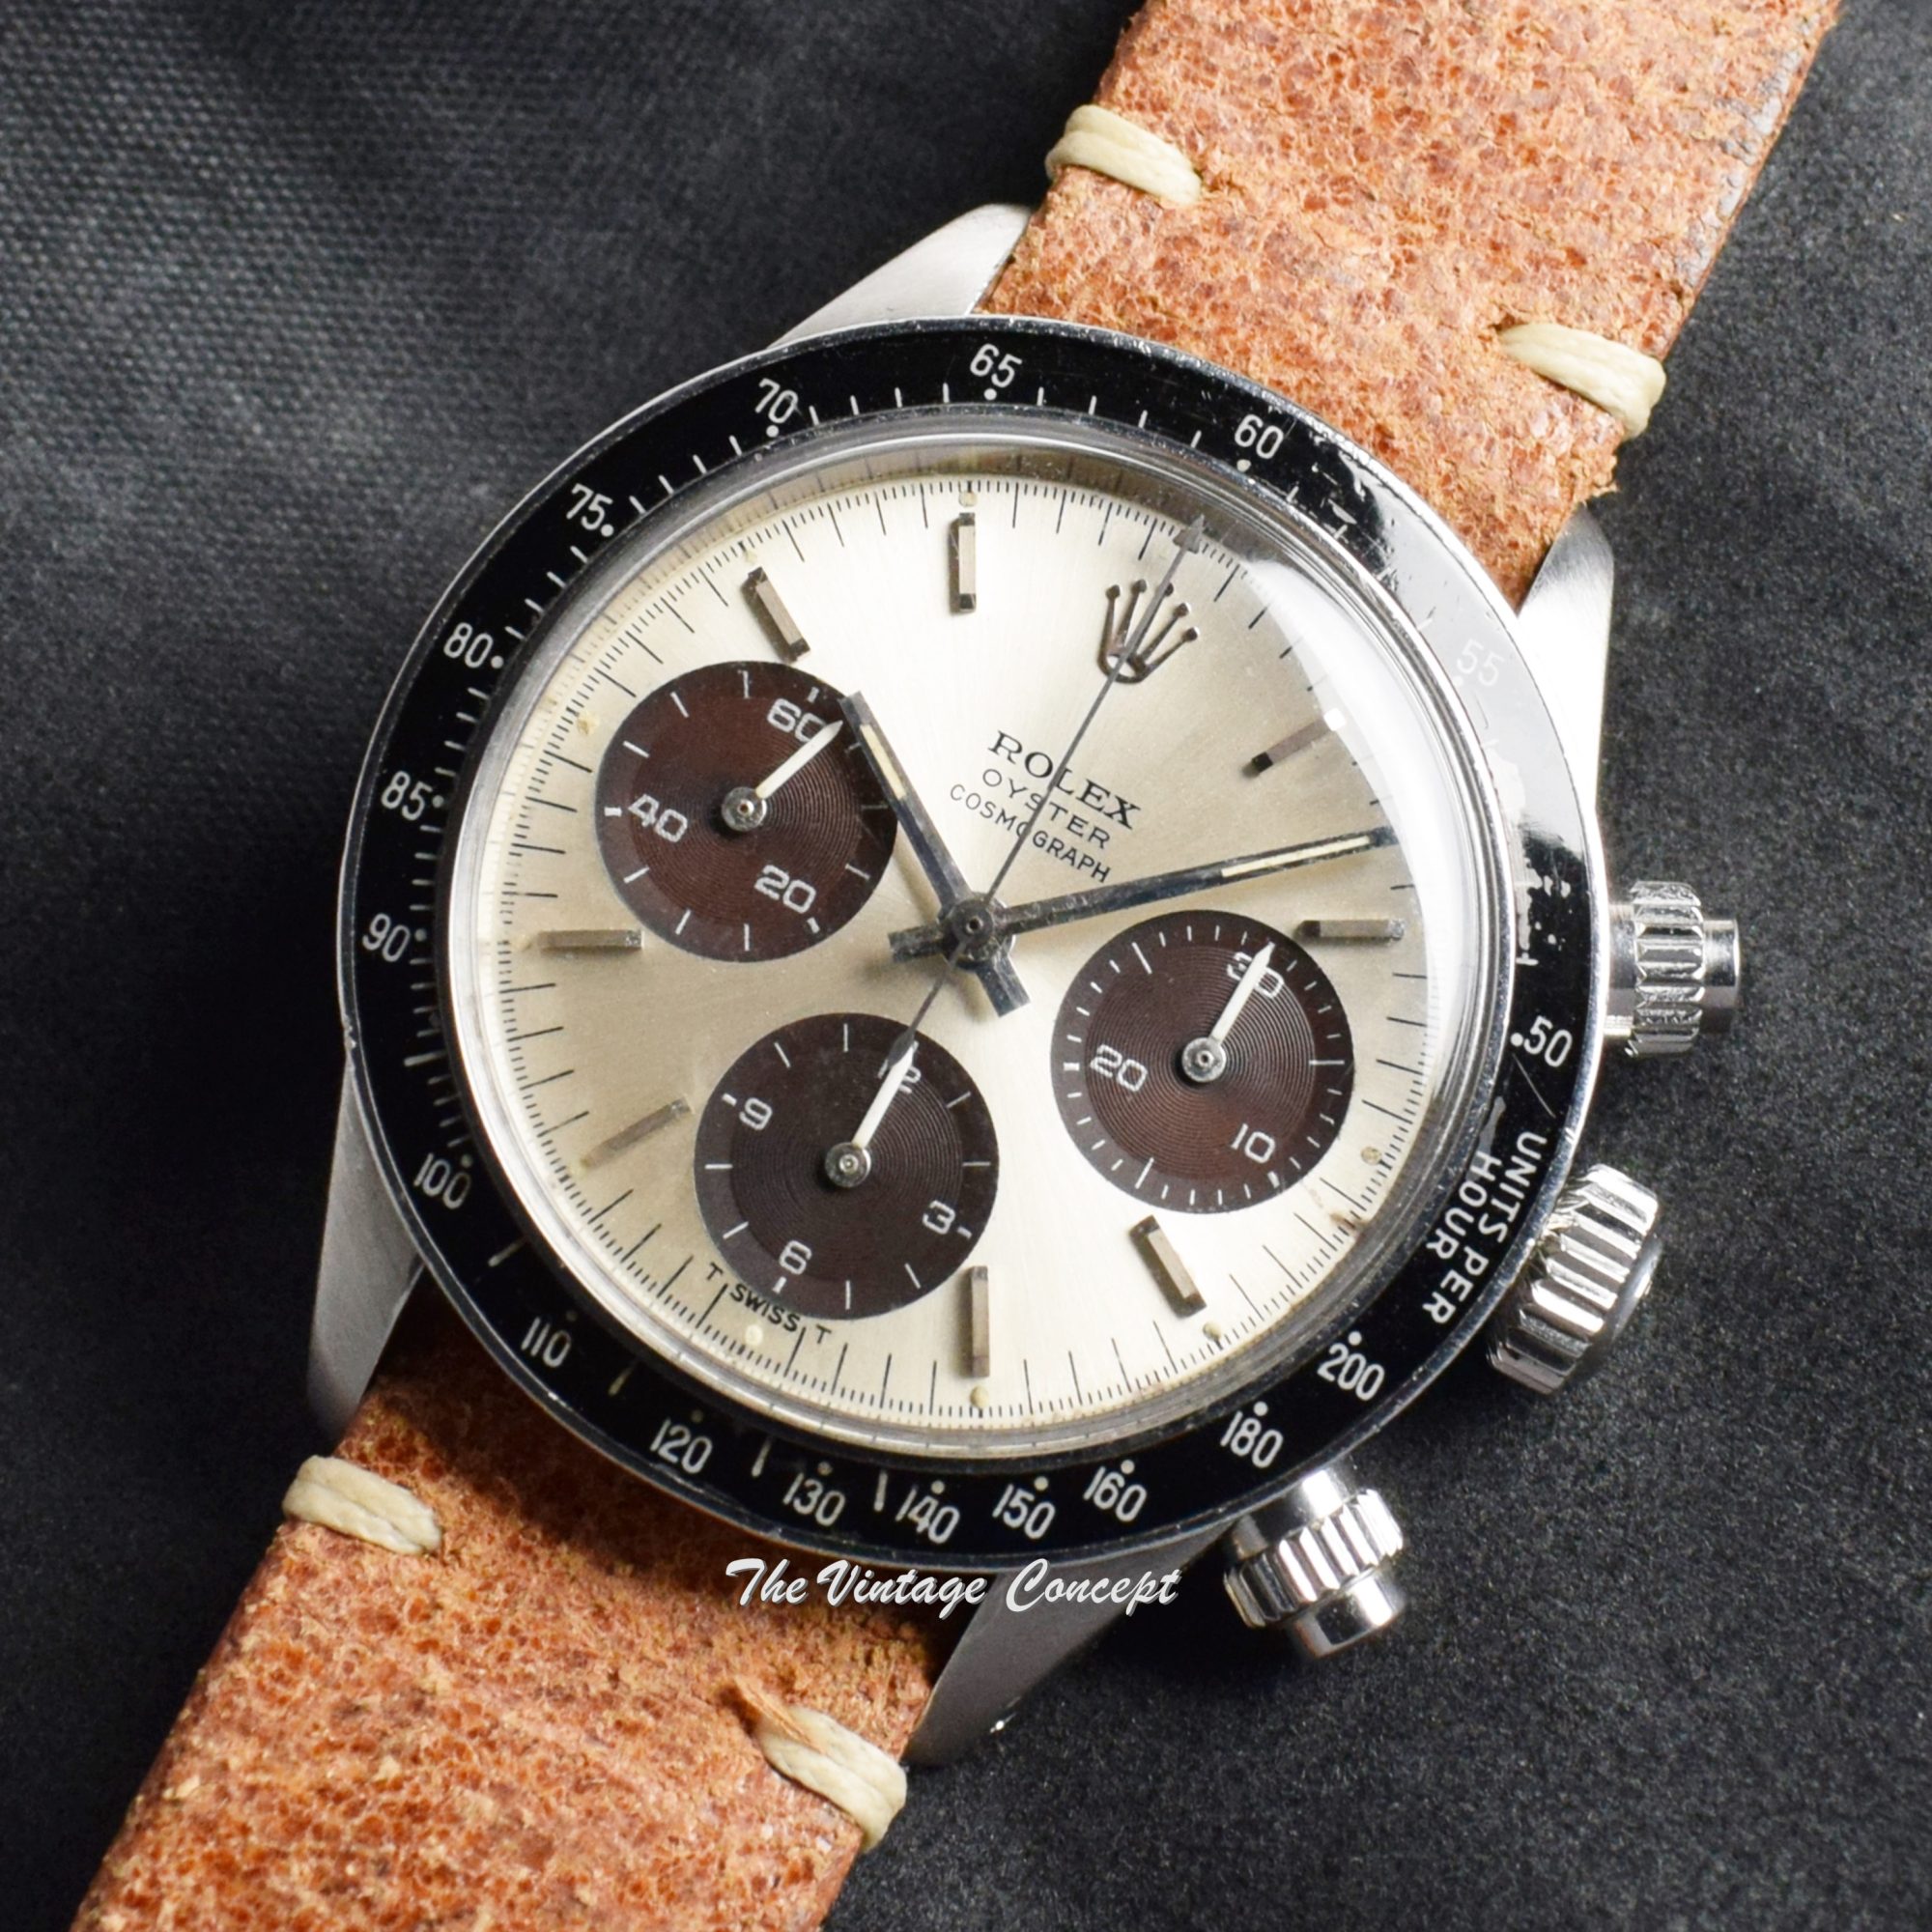 Rolex Daytona Silver Dial "Big Eyes" Tropical Sub Registers 6263 (SOLD) - The Vintage Concept